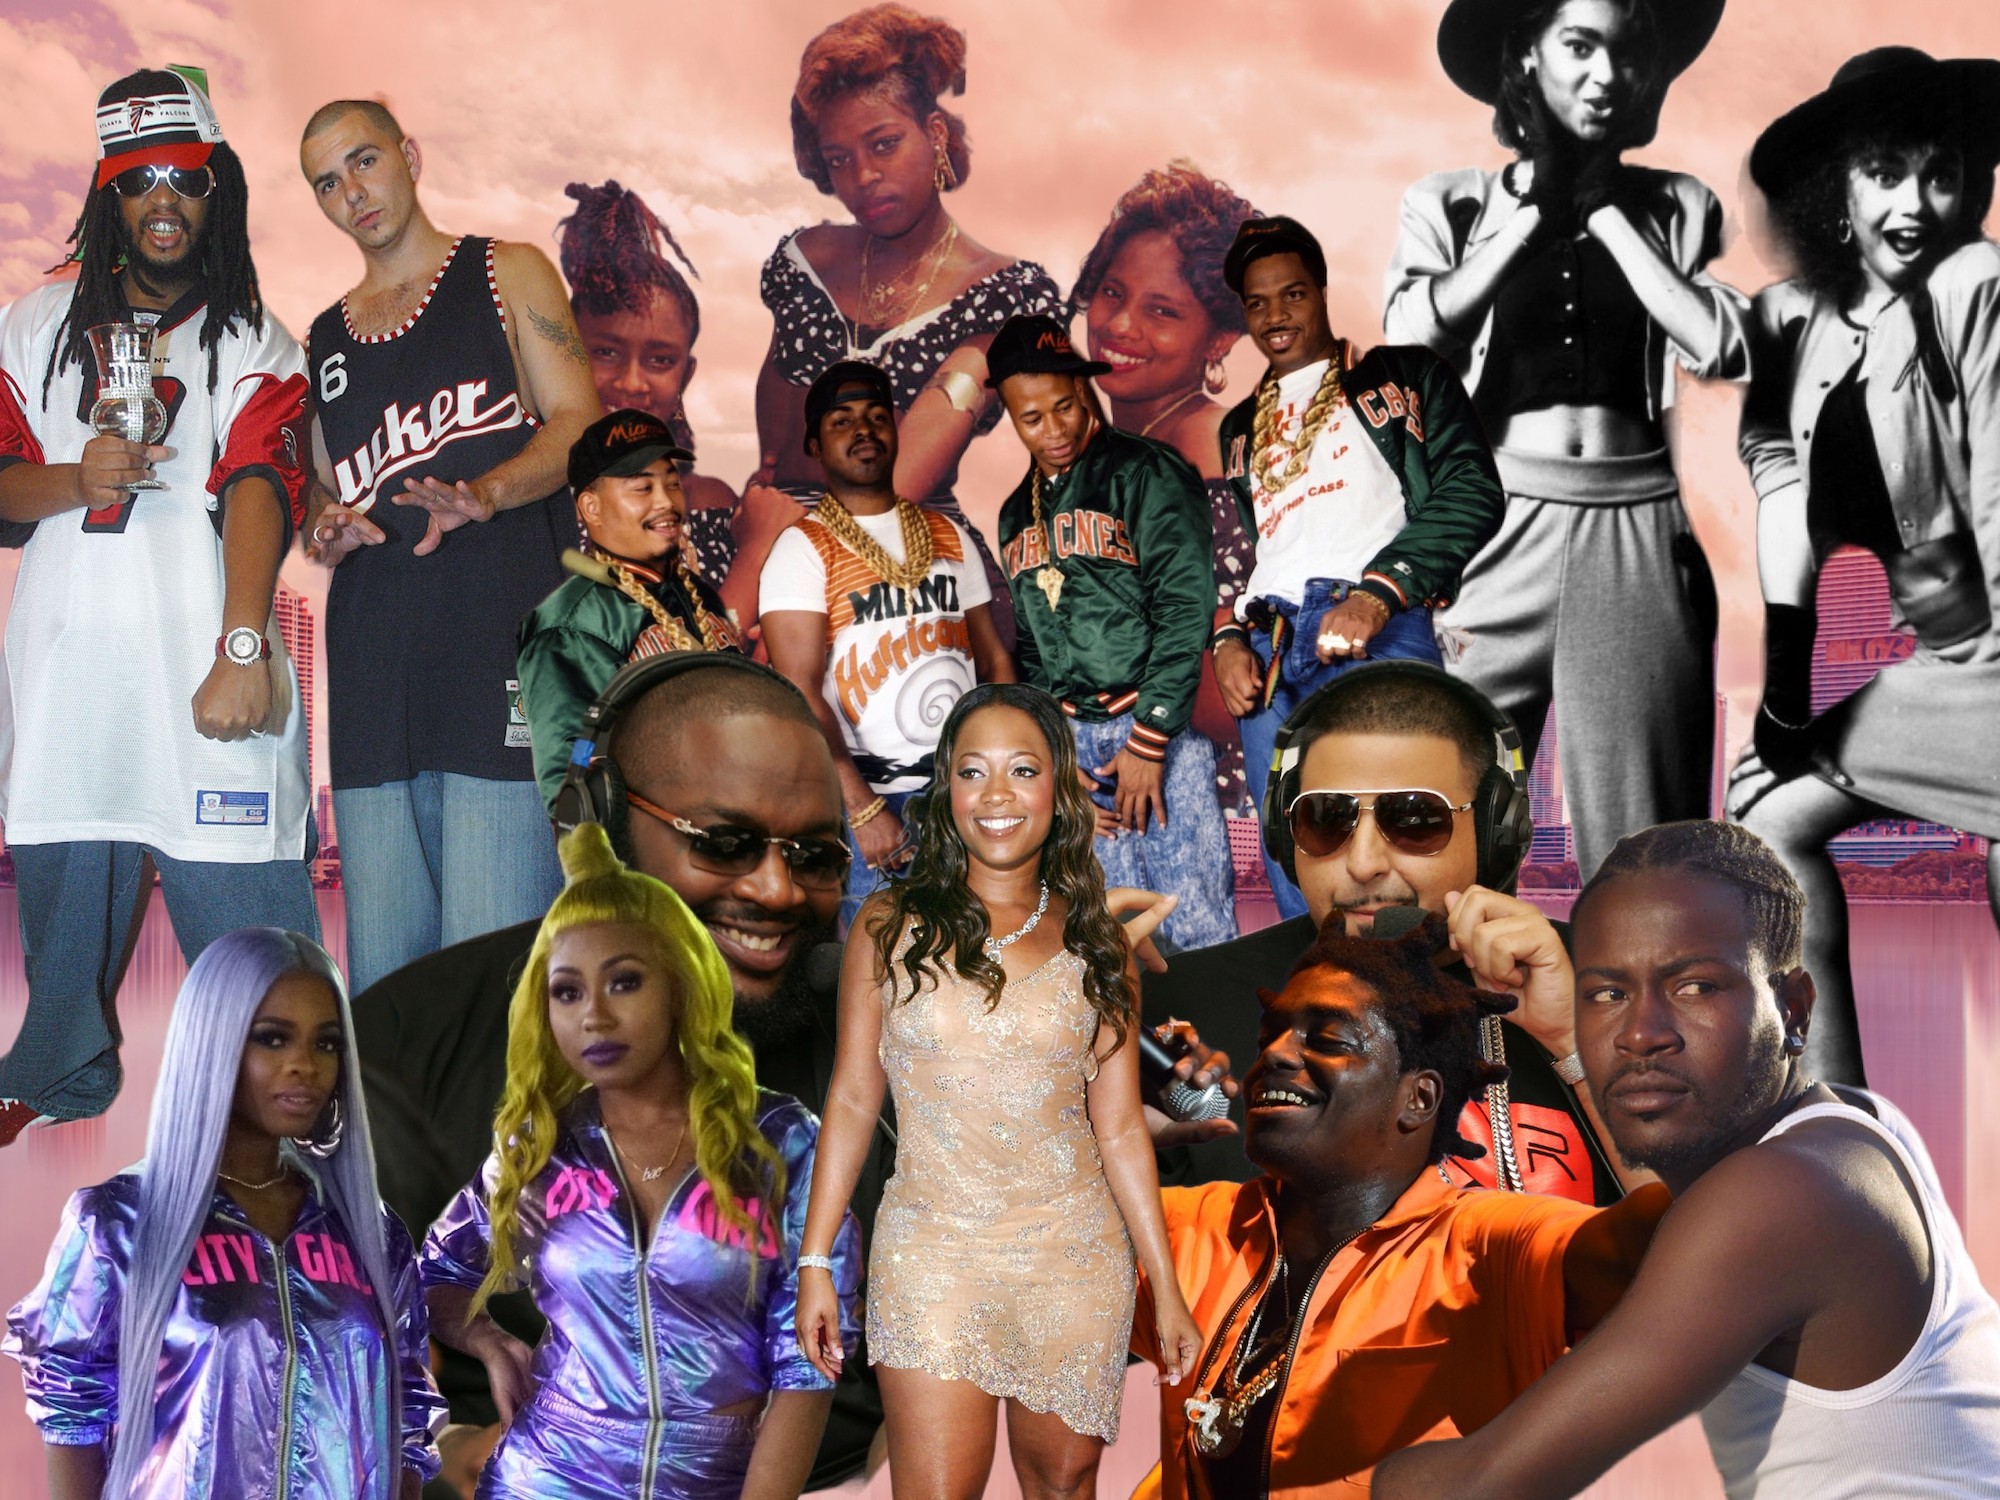 50 Years of Miami Hip-Hop and Rap Music History